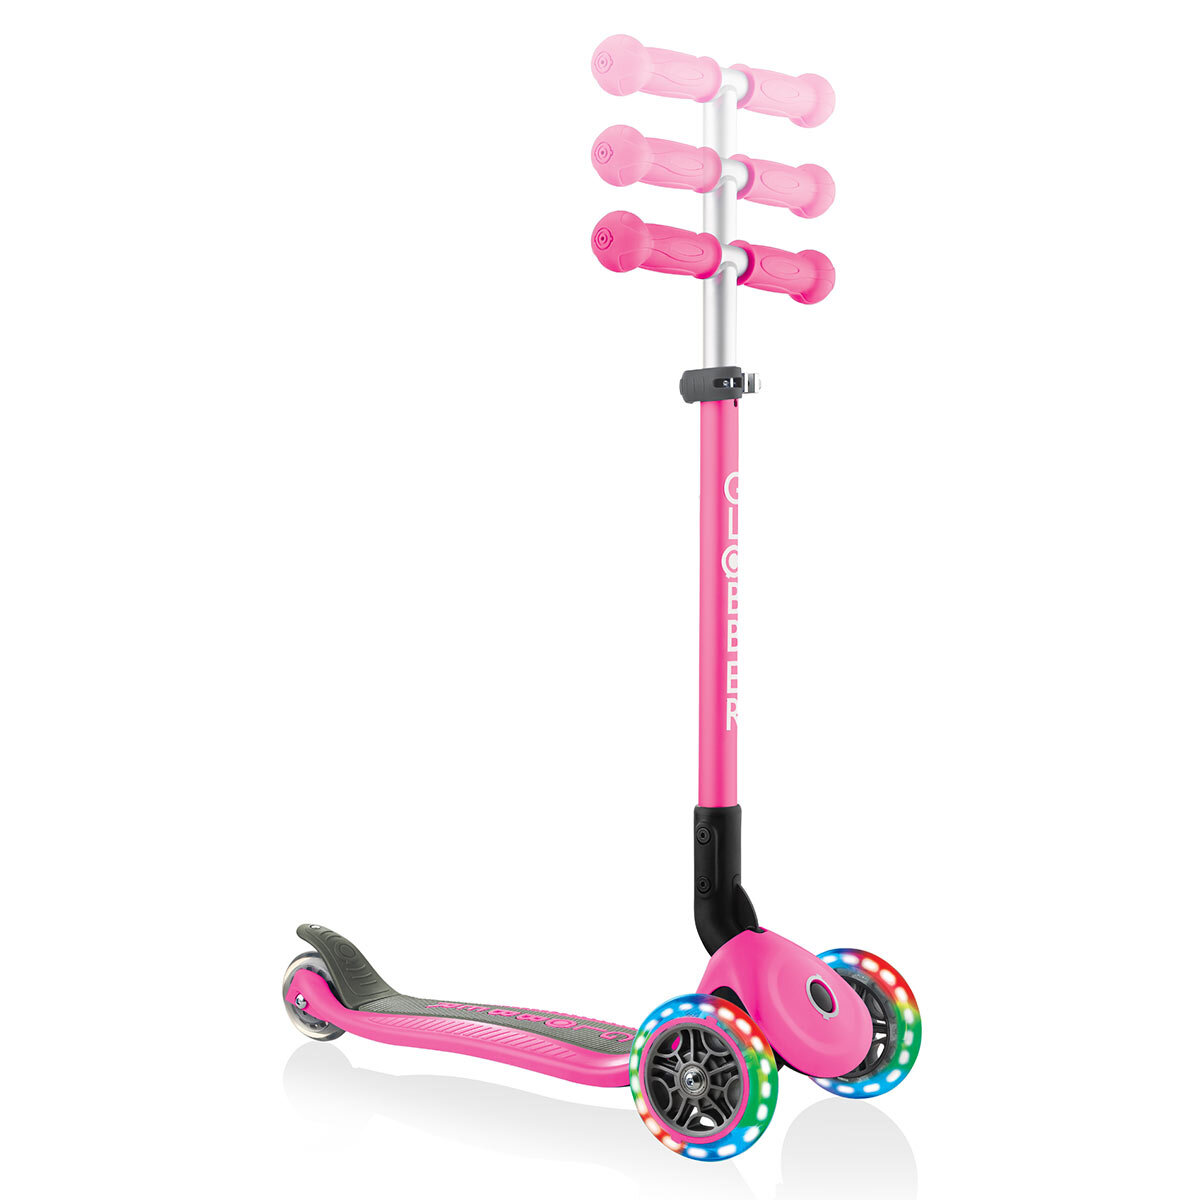 Buy Globber Primo Lights Scooter in Pink 2 Image at Costco.co.uk